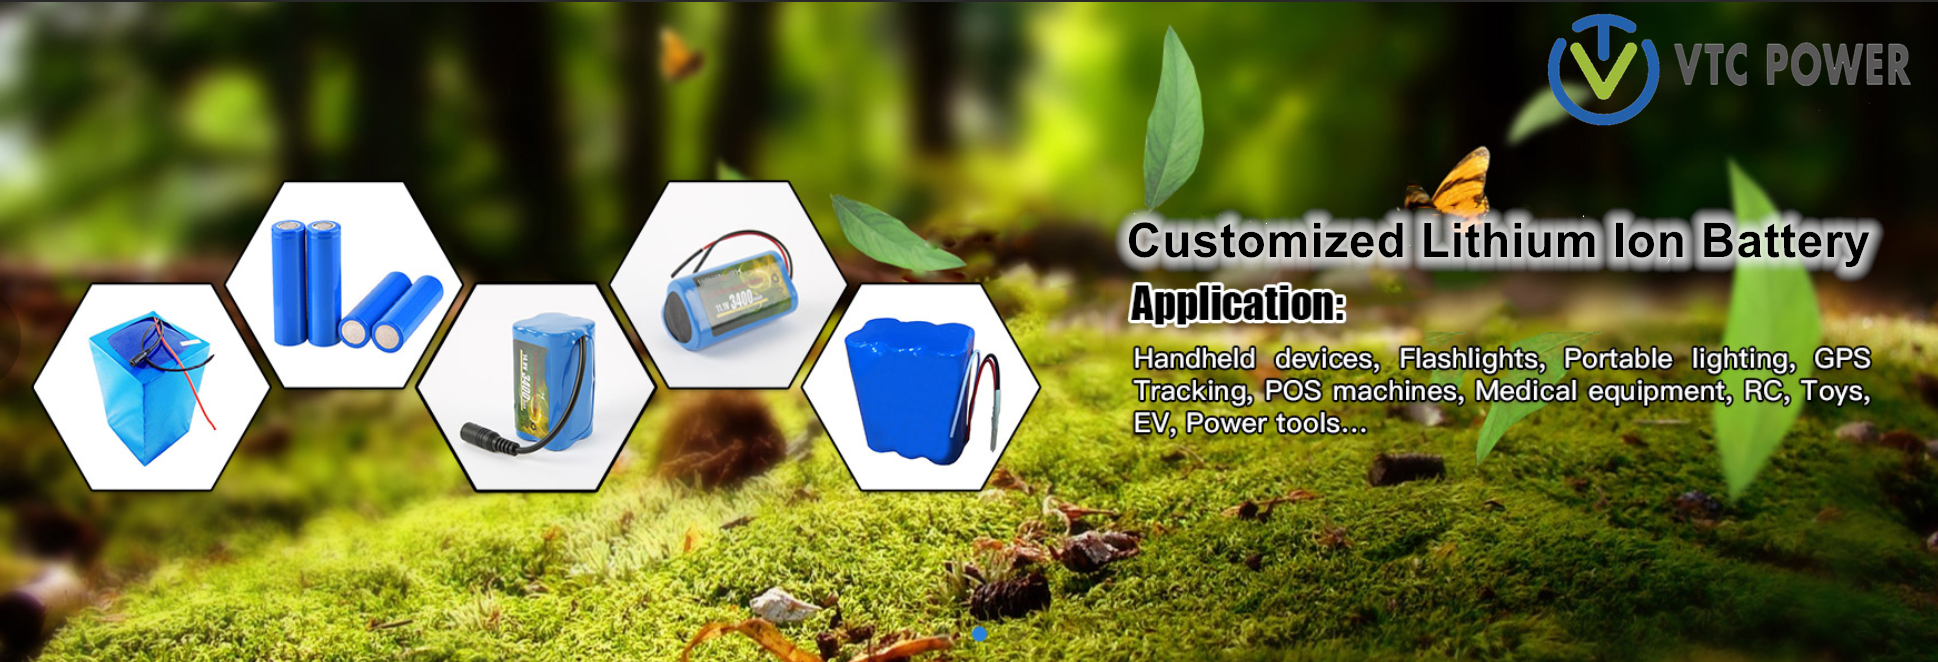 How to choose customized lithium ion battery suitable for your hardware?